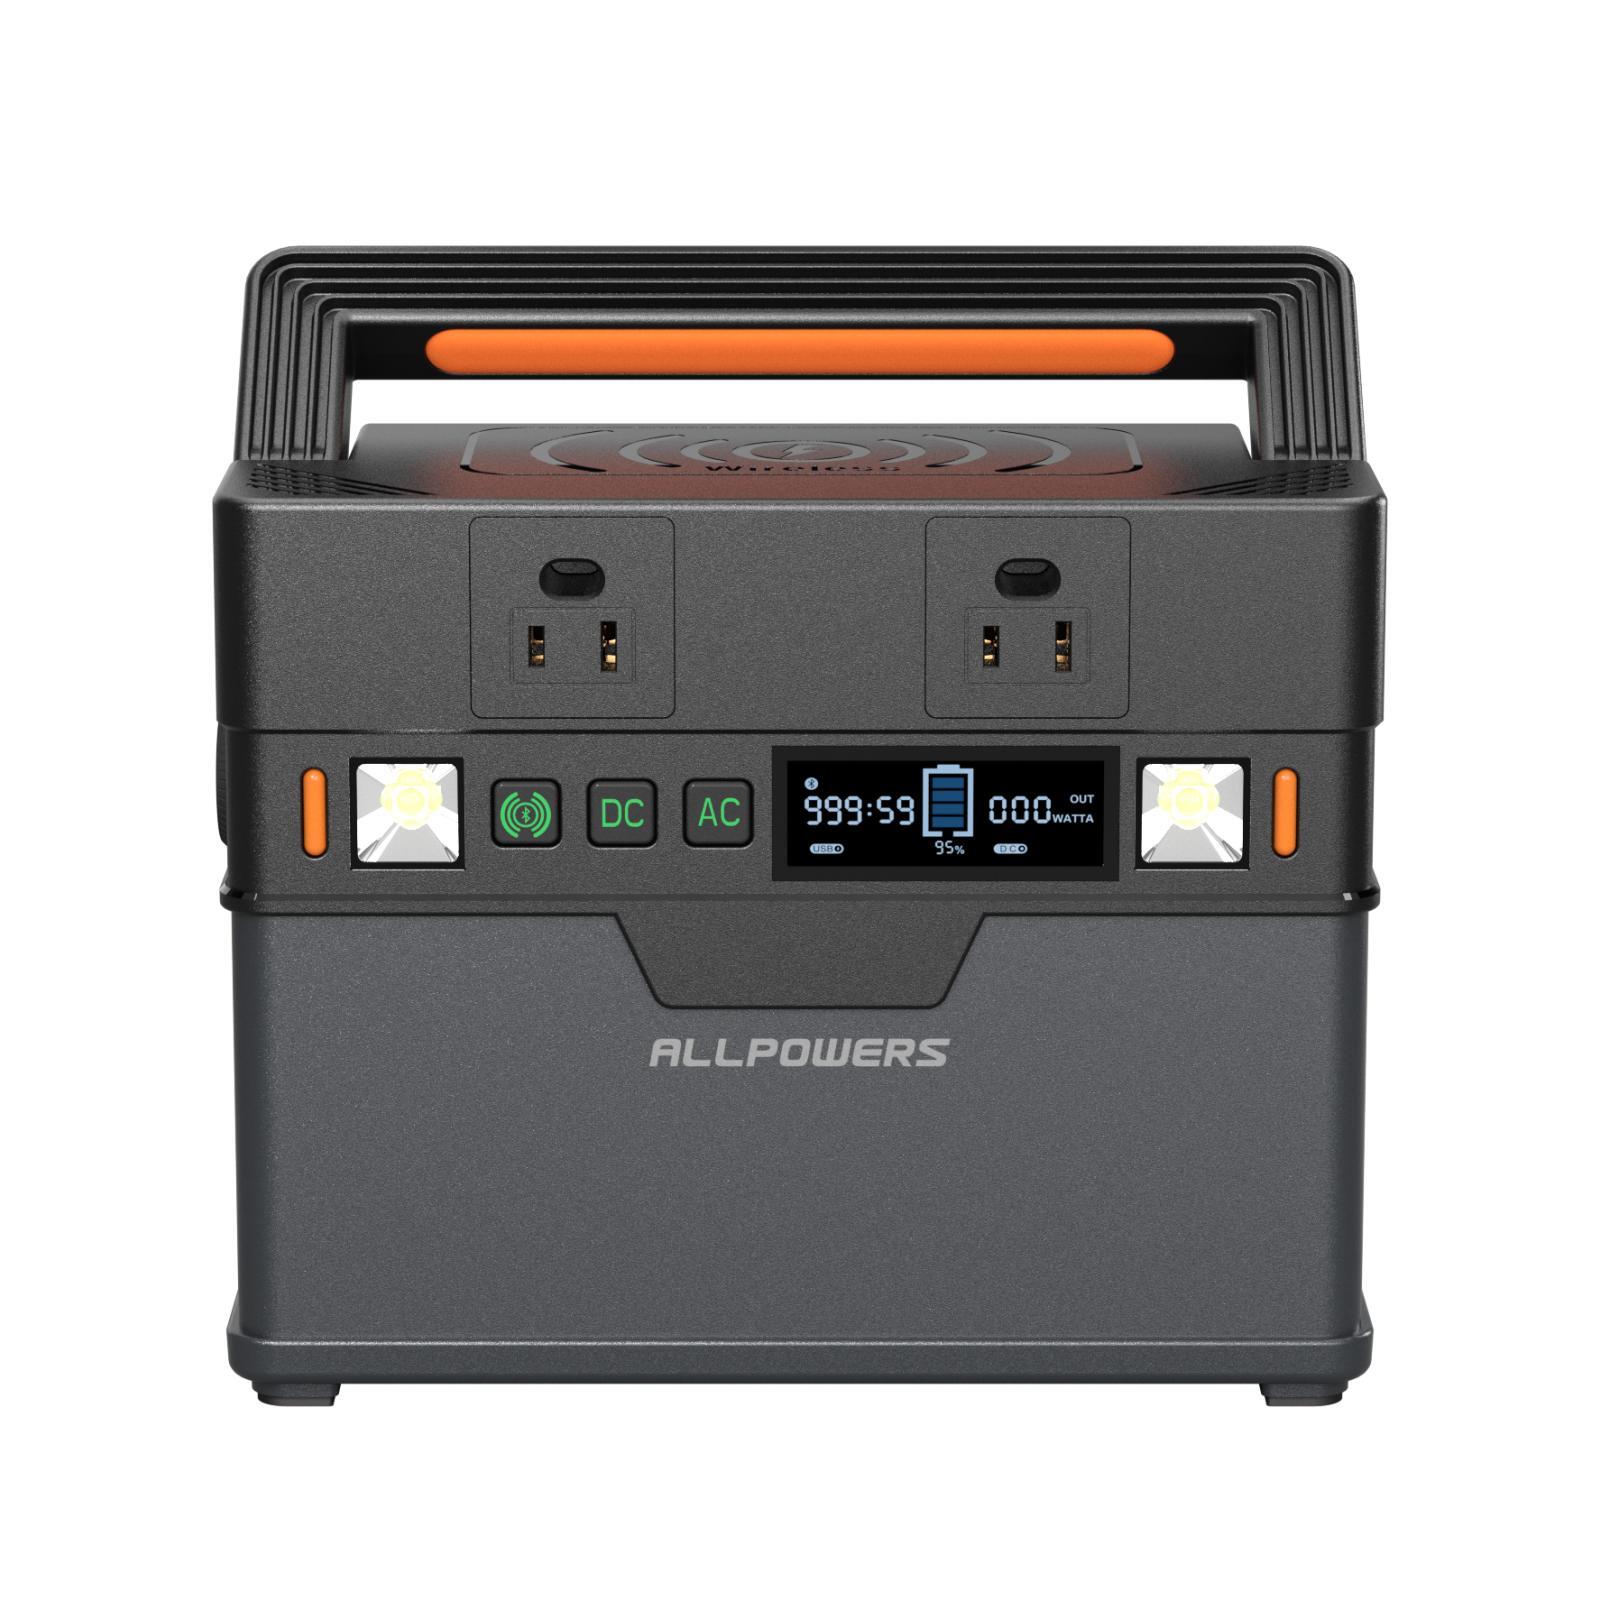 ALLPOWERS S300 ポータブル電源(288Wh/300W)